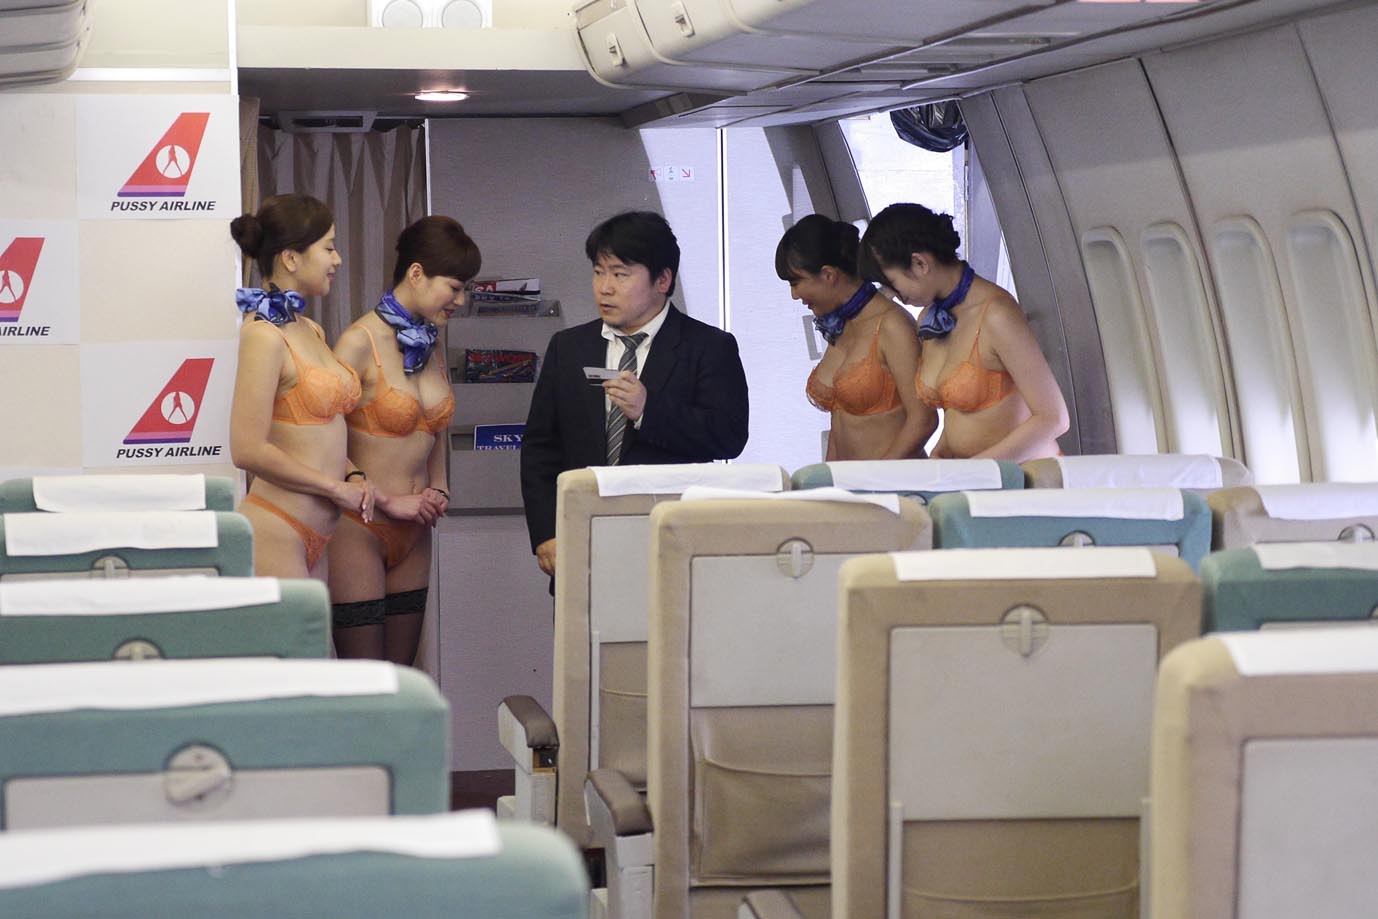 Singapore airline nude